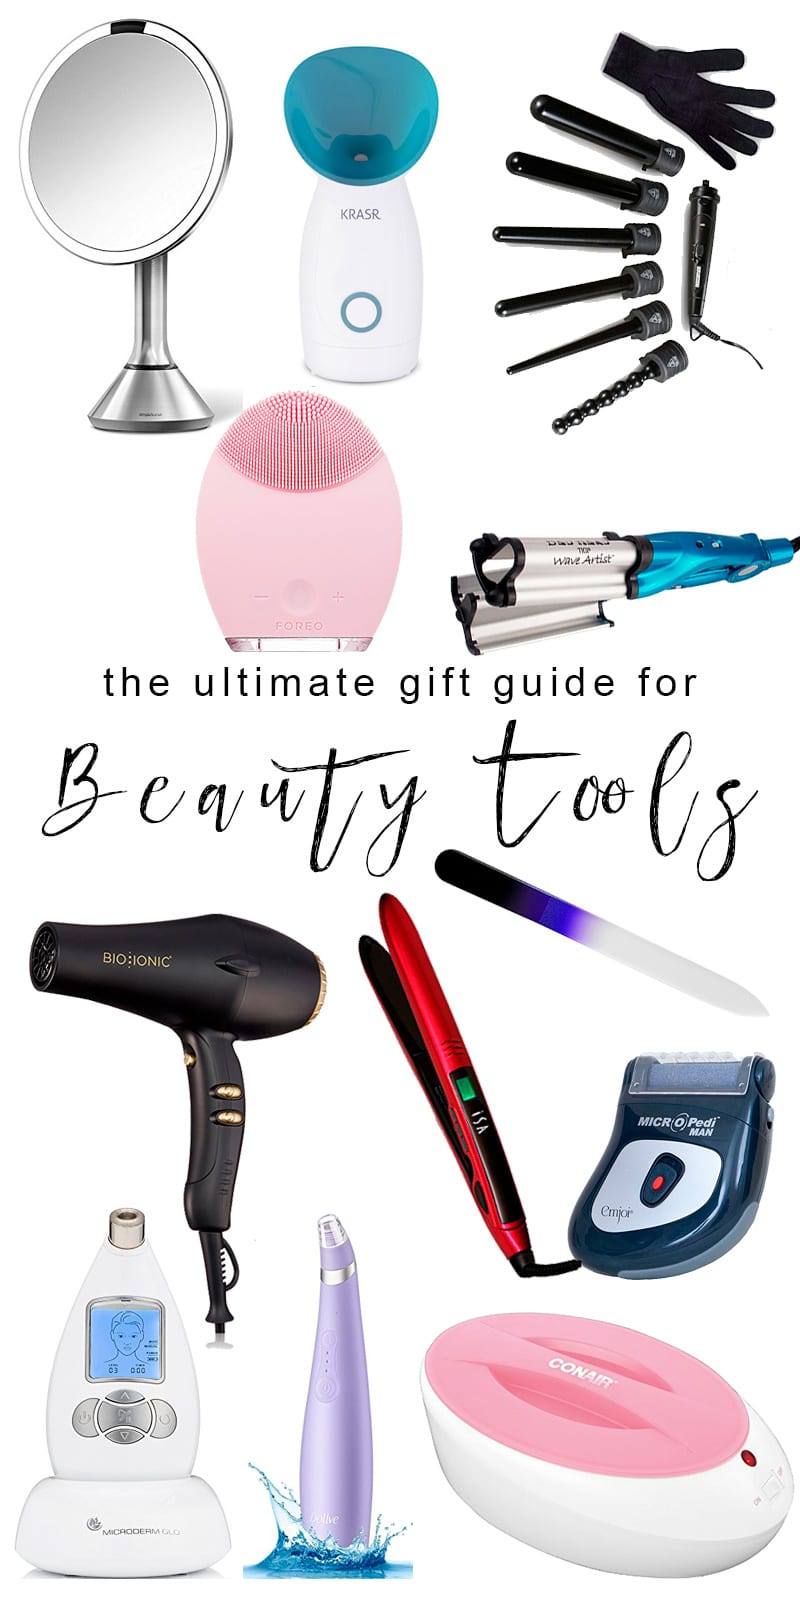 Beauty Tools Gift Guide